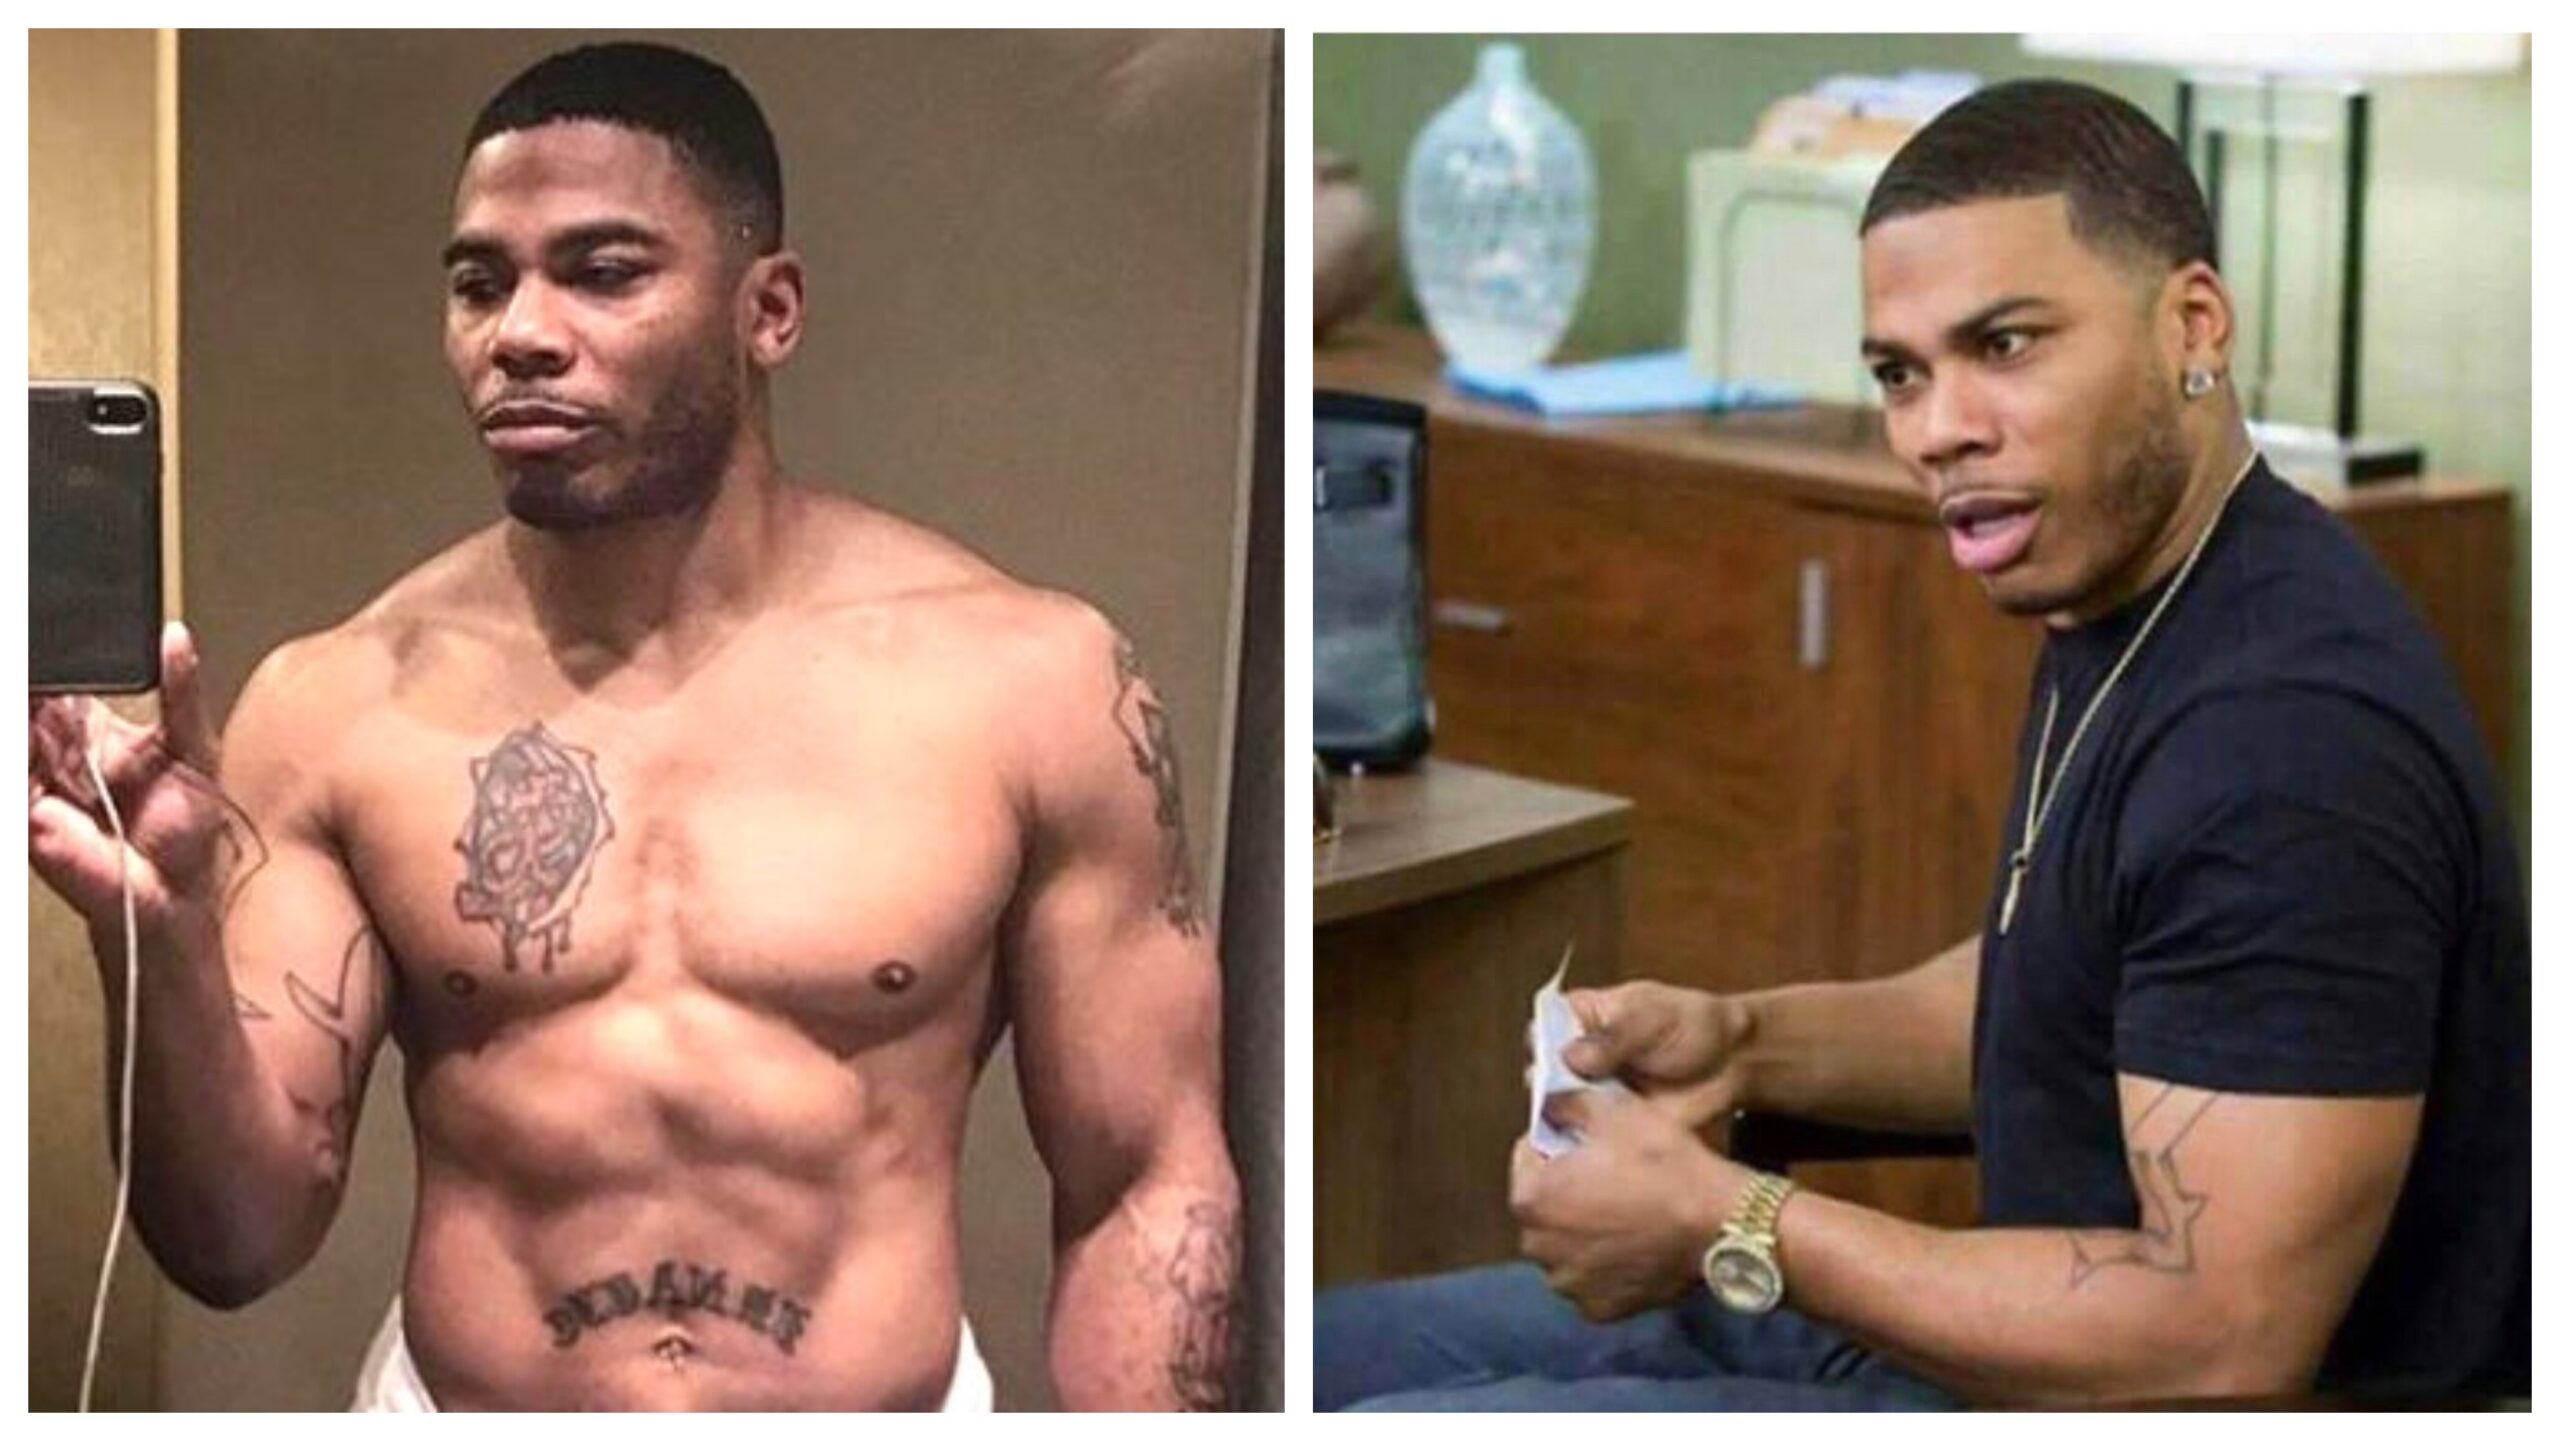 Read more about: Nelly Issues Apology After Explicit Video Leak. rapper was...